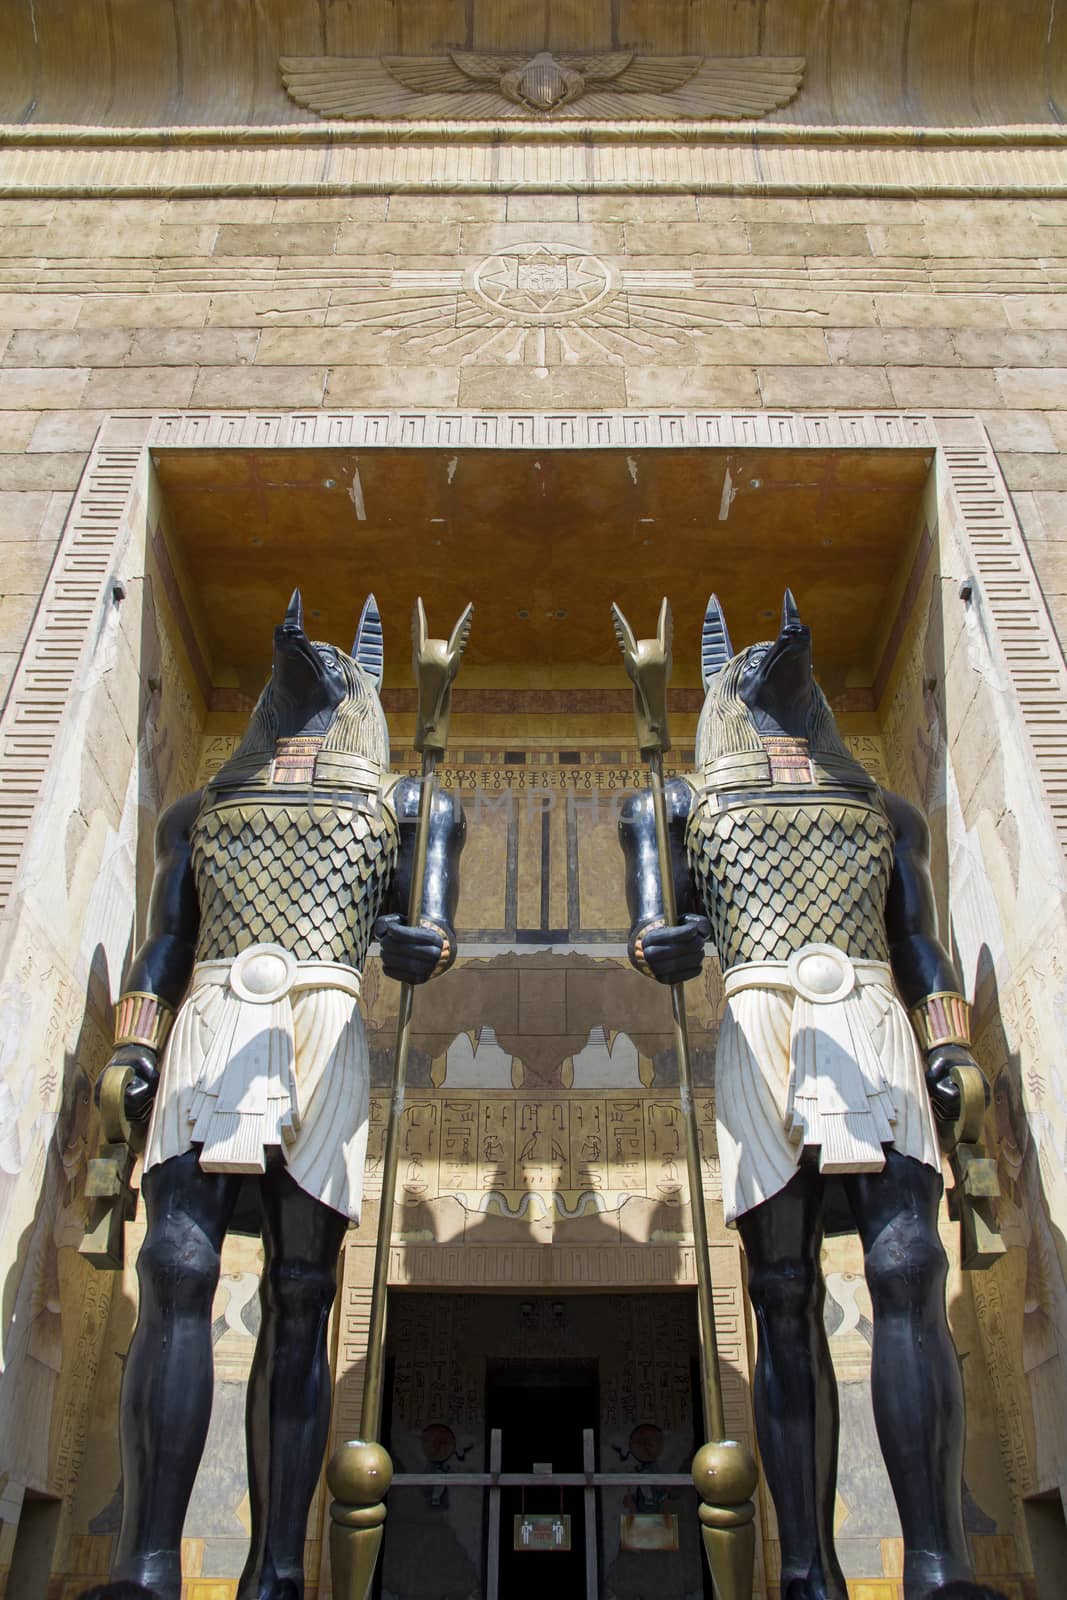 Two huge statues of the Egyptian god Anubis - the god of the afterlife with batons in their hands guard the entrance to the building. Bottom view.